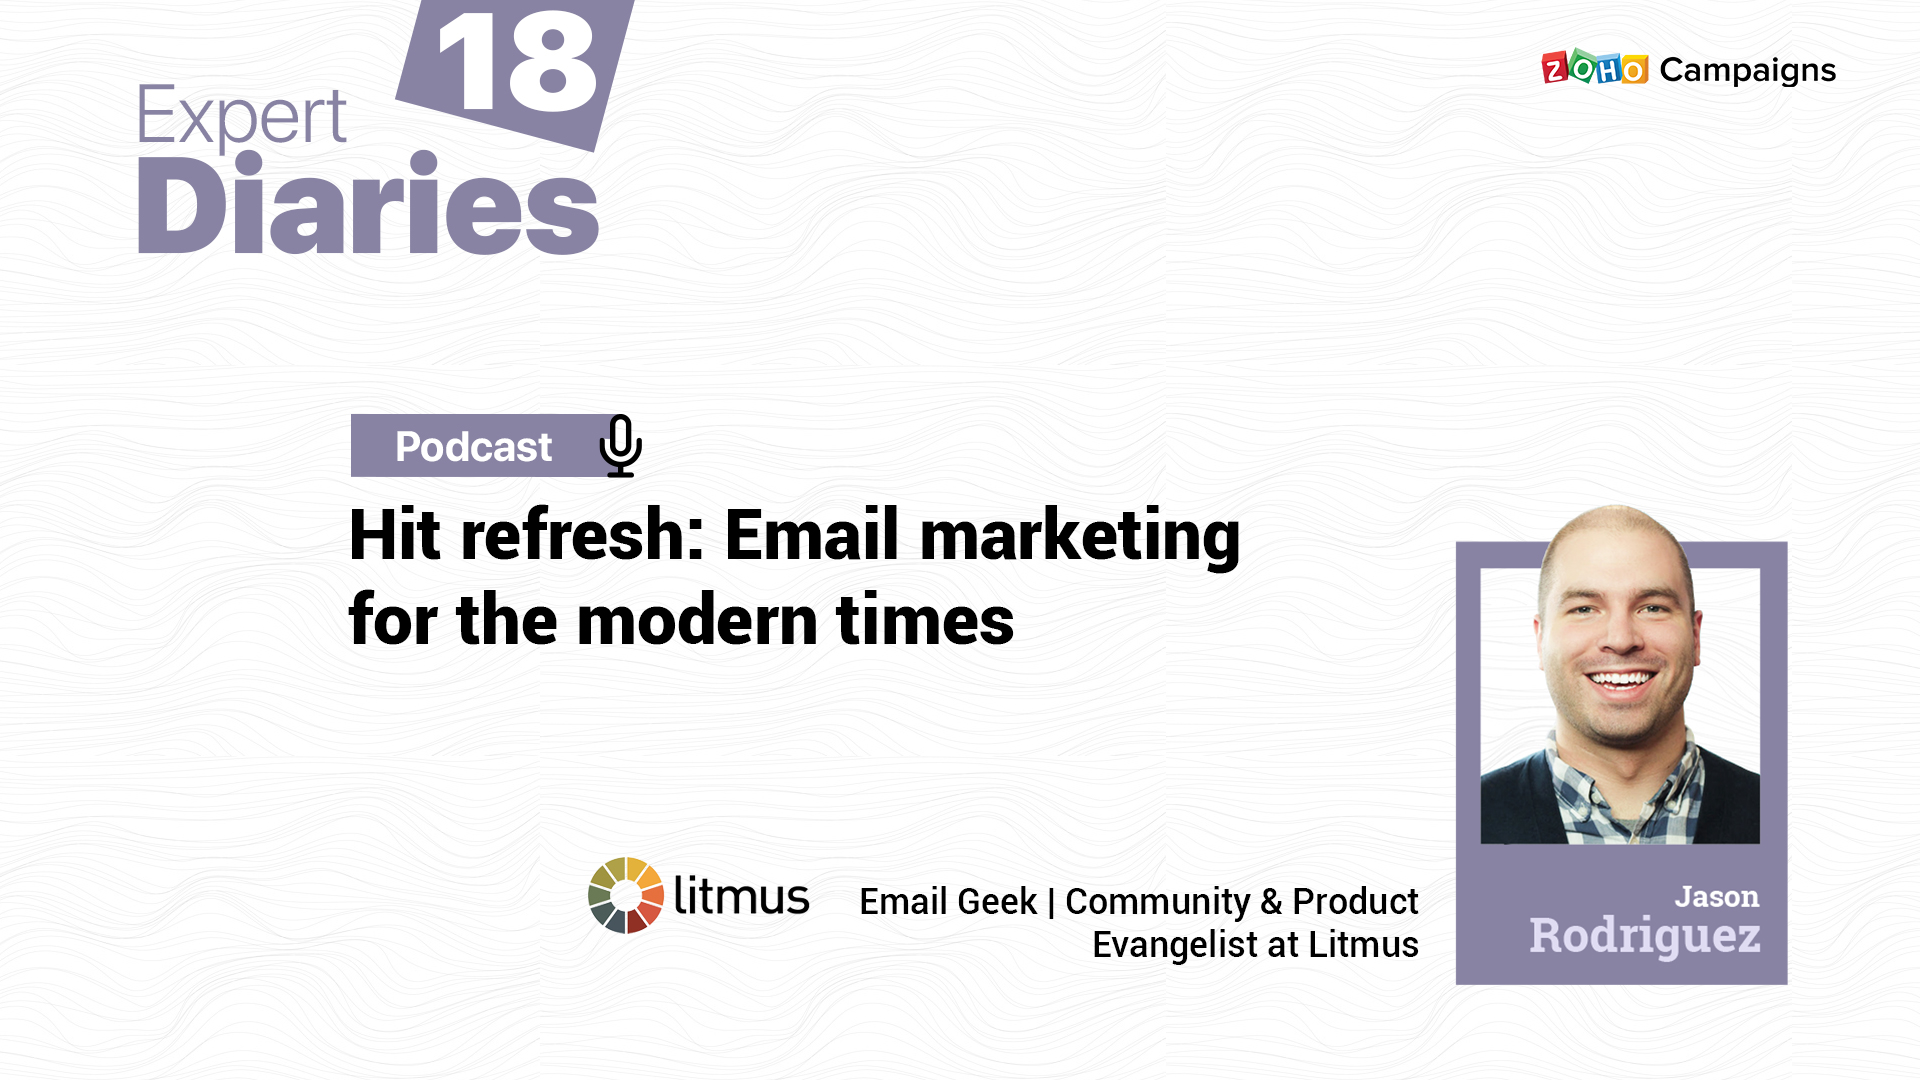 Hit refresh: Email marketing for the modern times